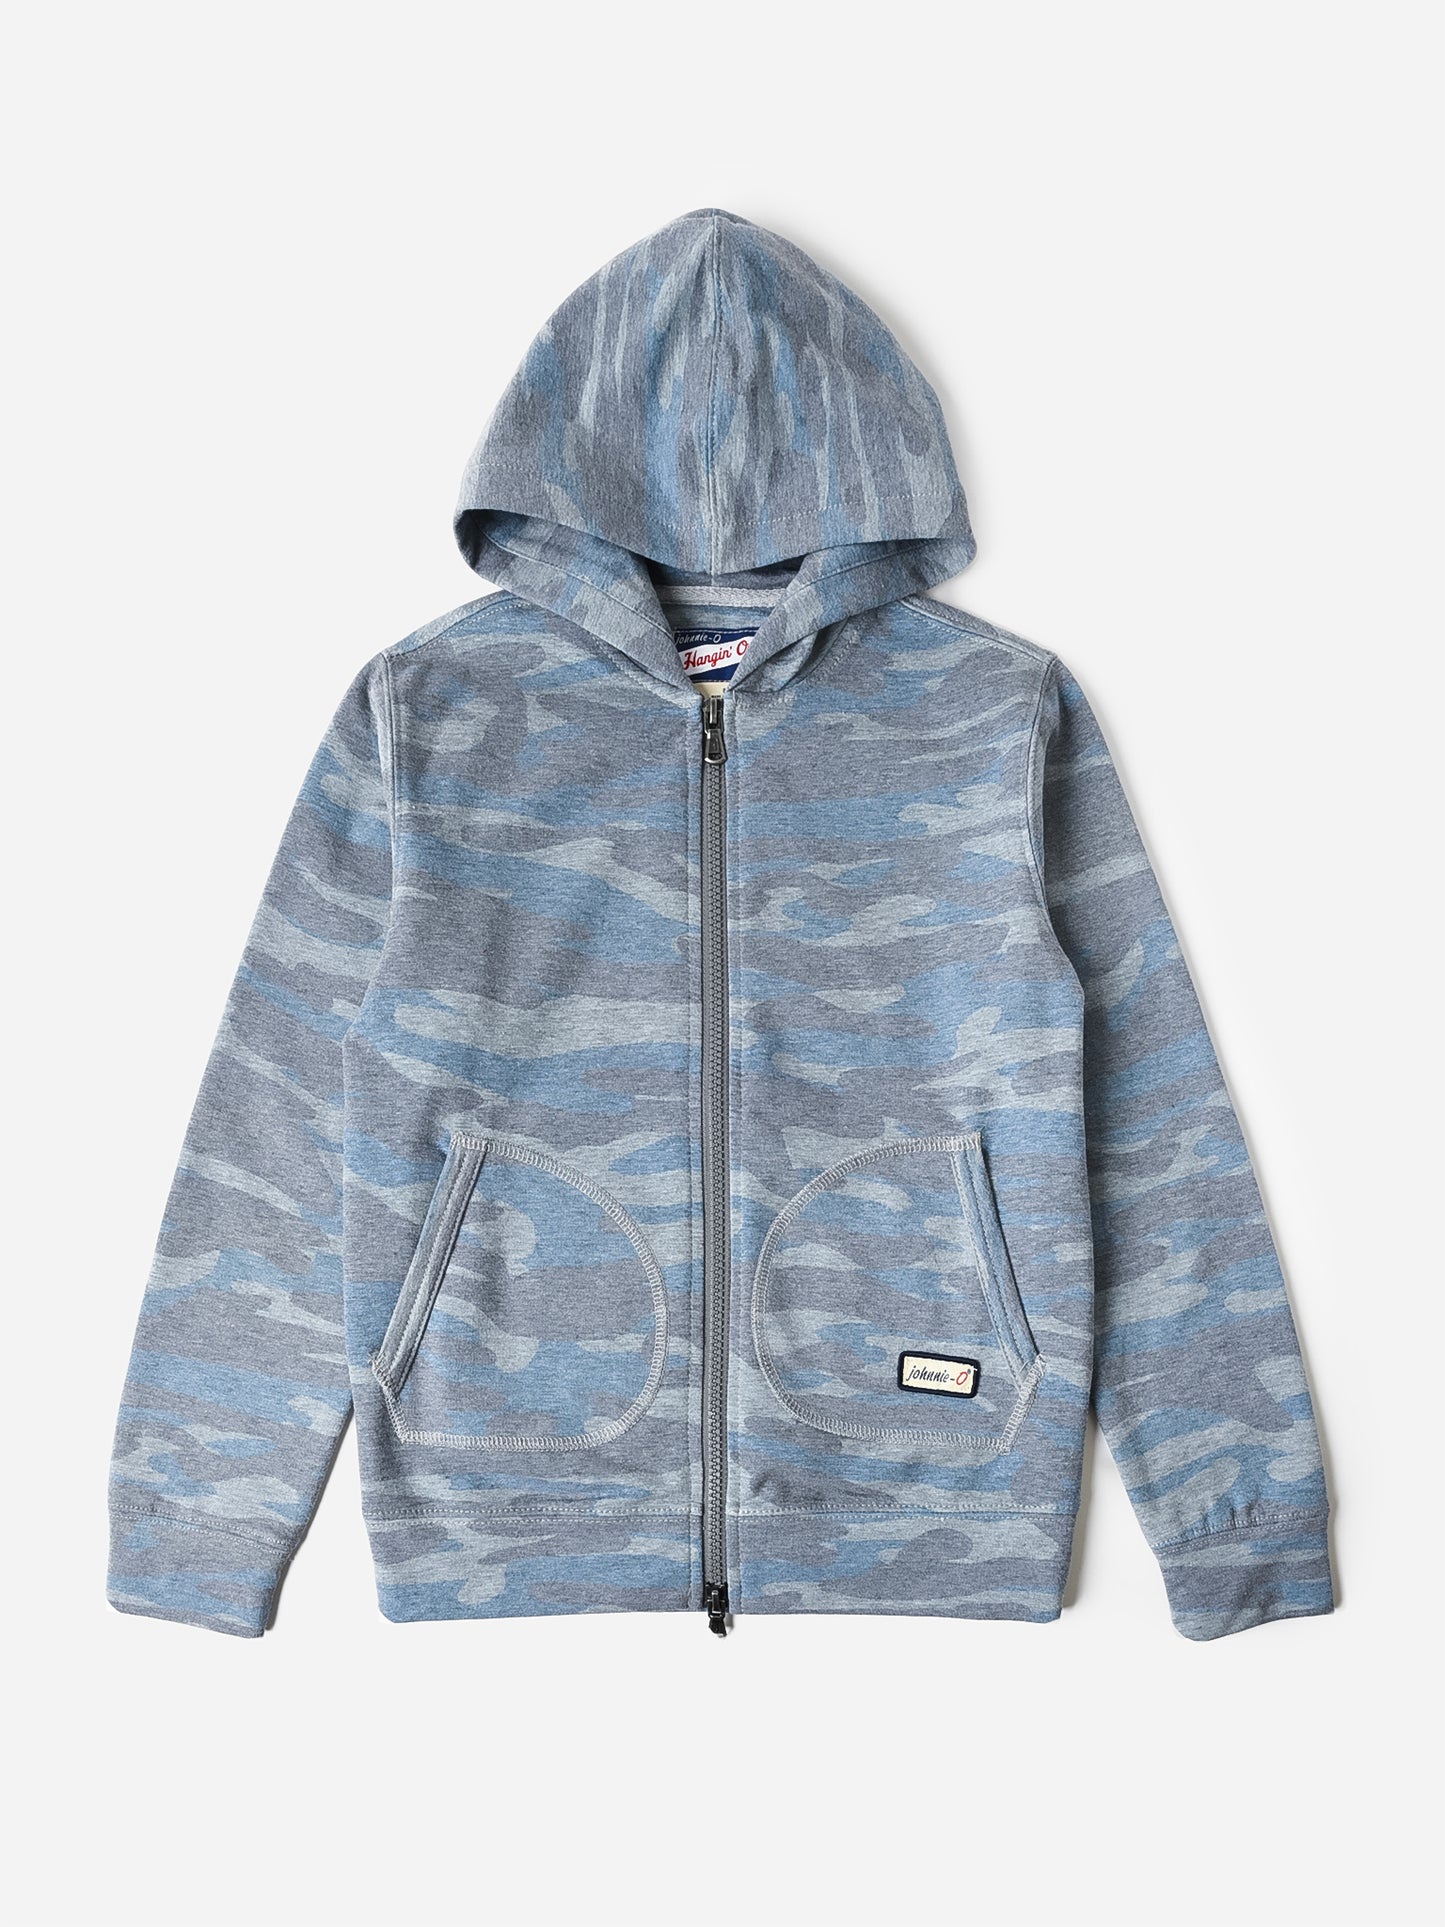 Johnnie-O Boys' Avery Jr. Double Zip Front Hoodie